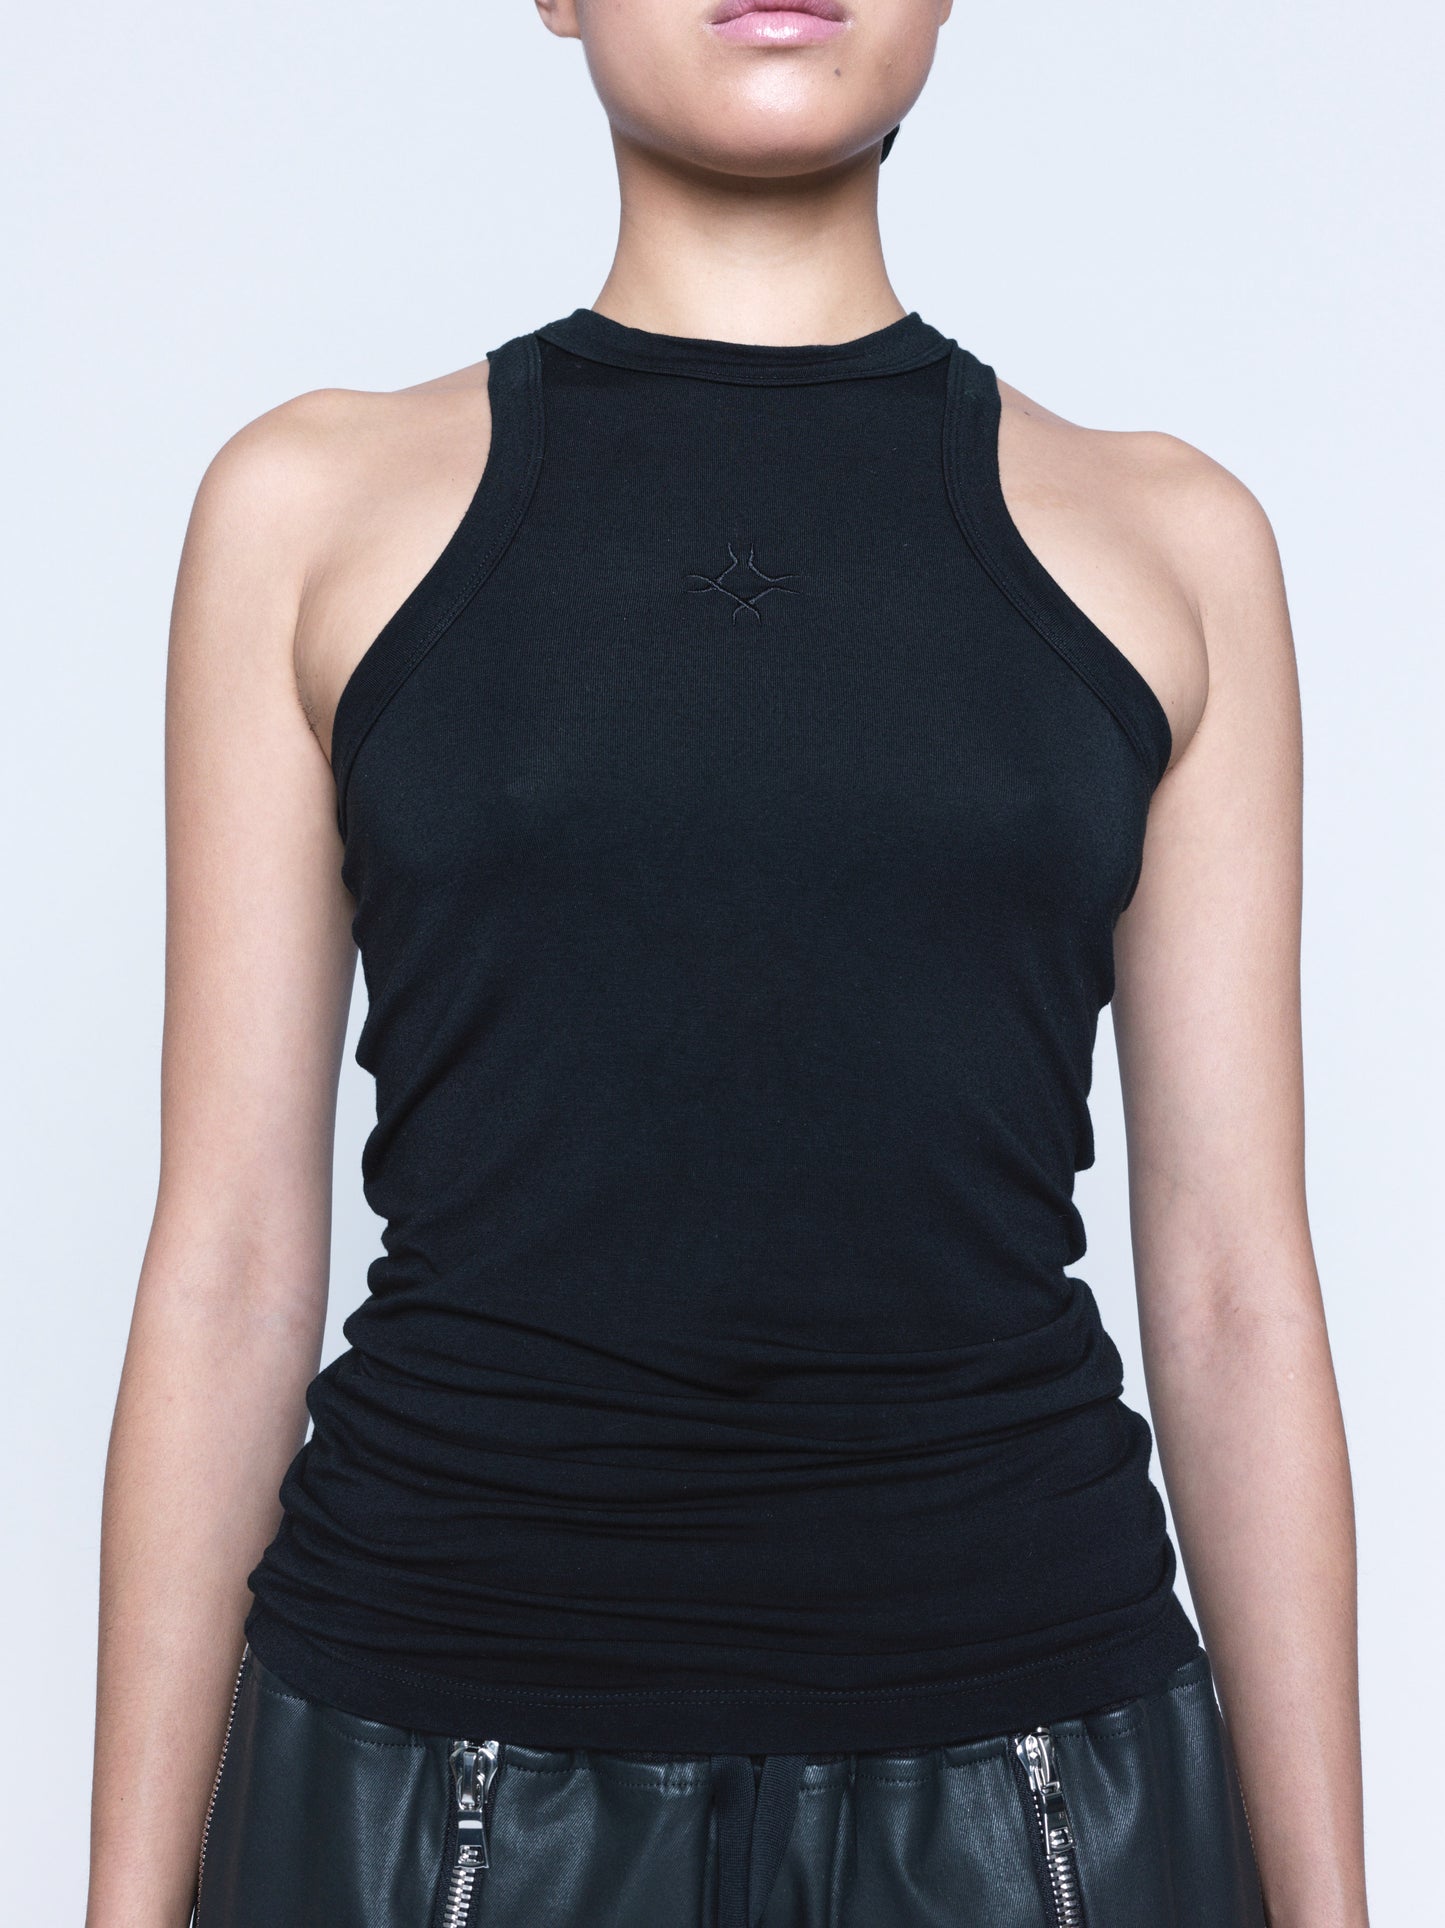 755 Black Embroidered Tank Top Unisex